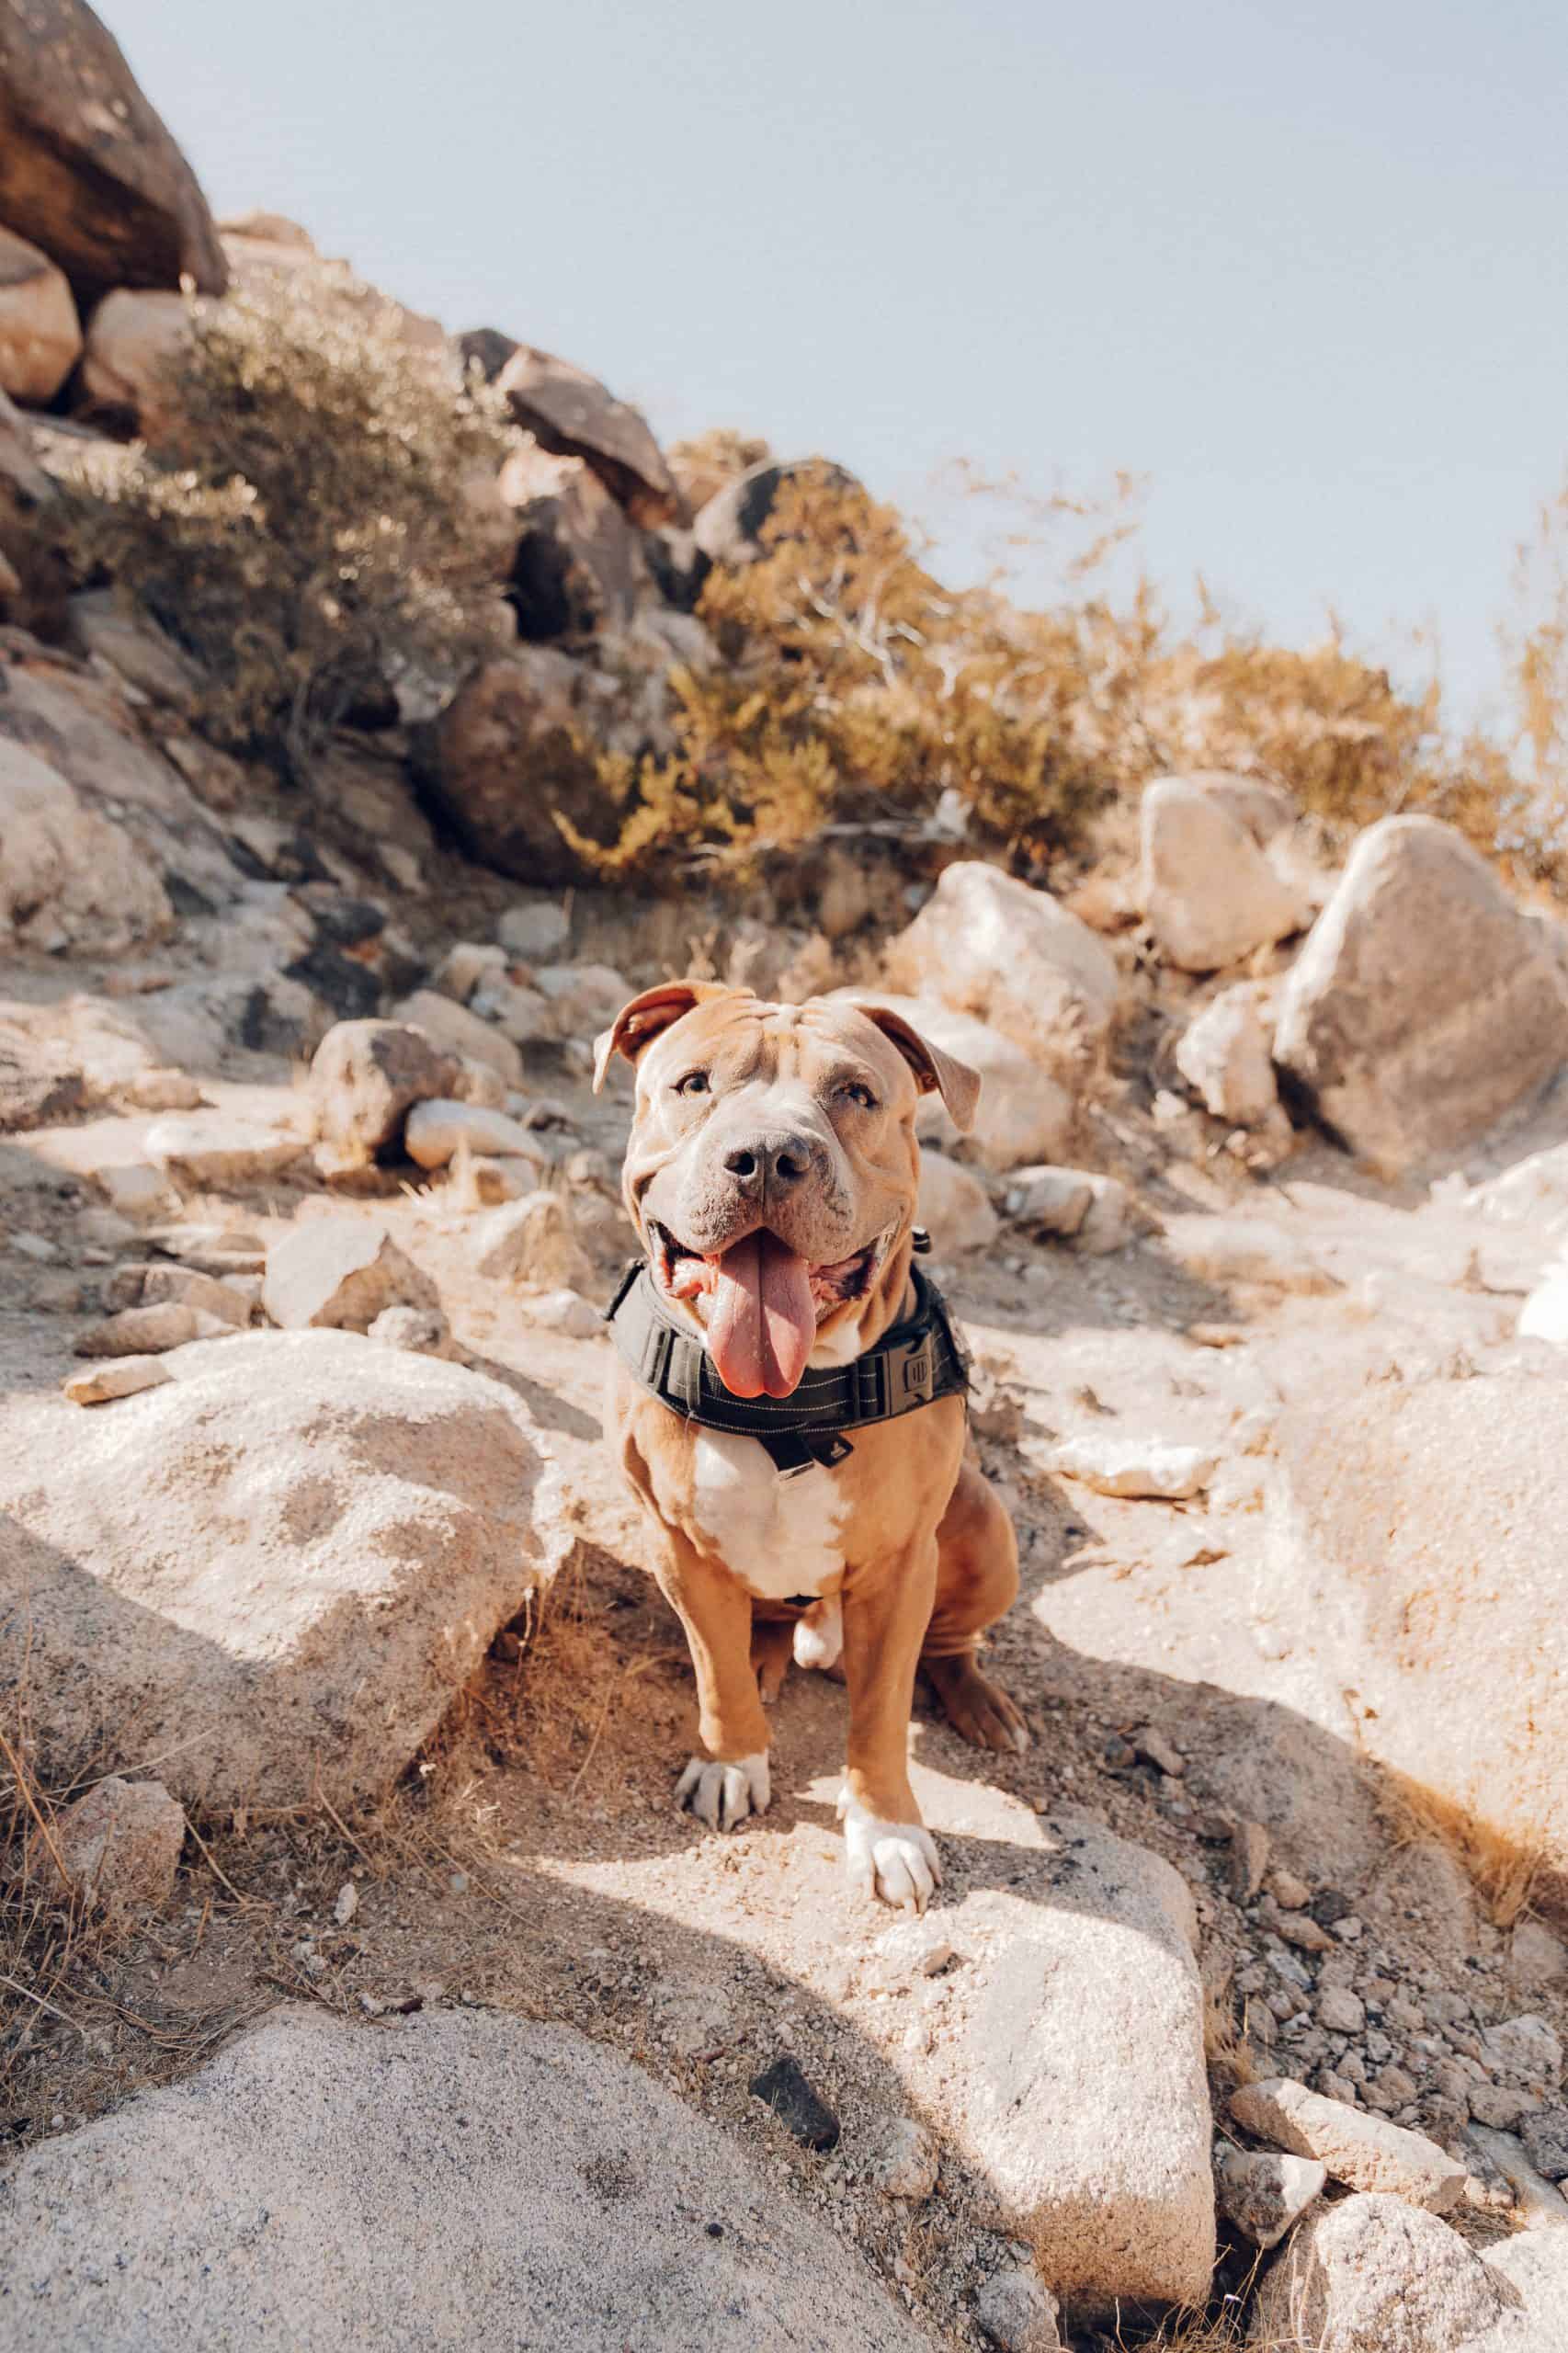 A tan pit bull wearing a black harness sits in front of a rocky desert landscape in Joshua Tree National Park